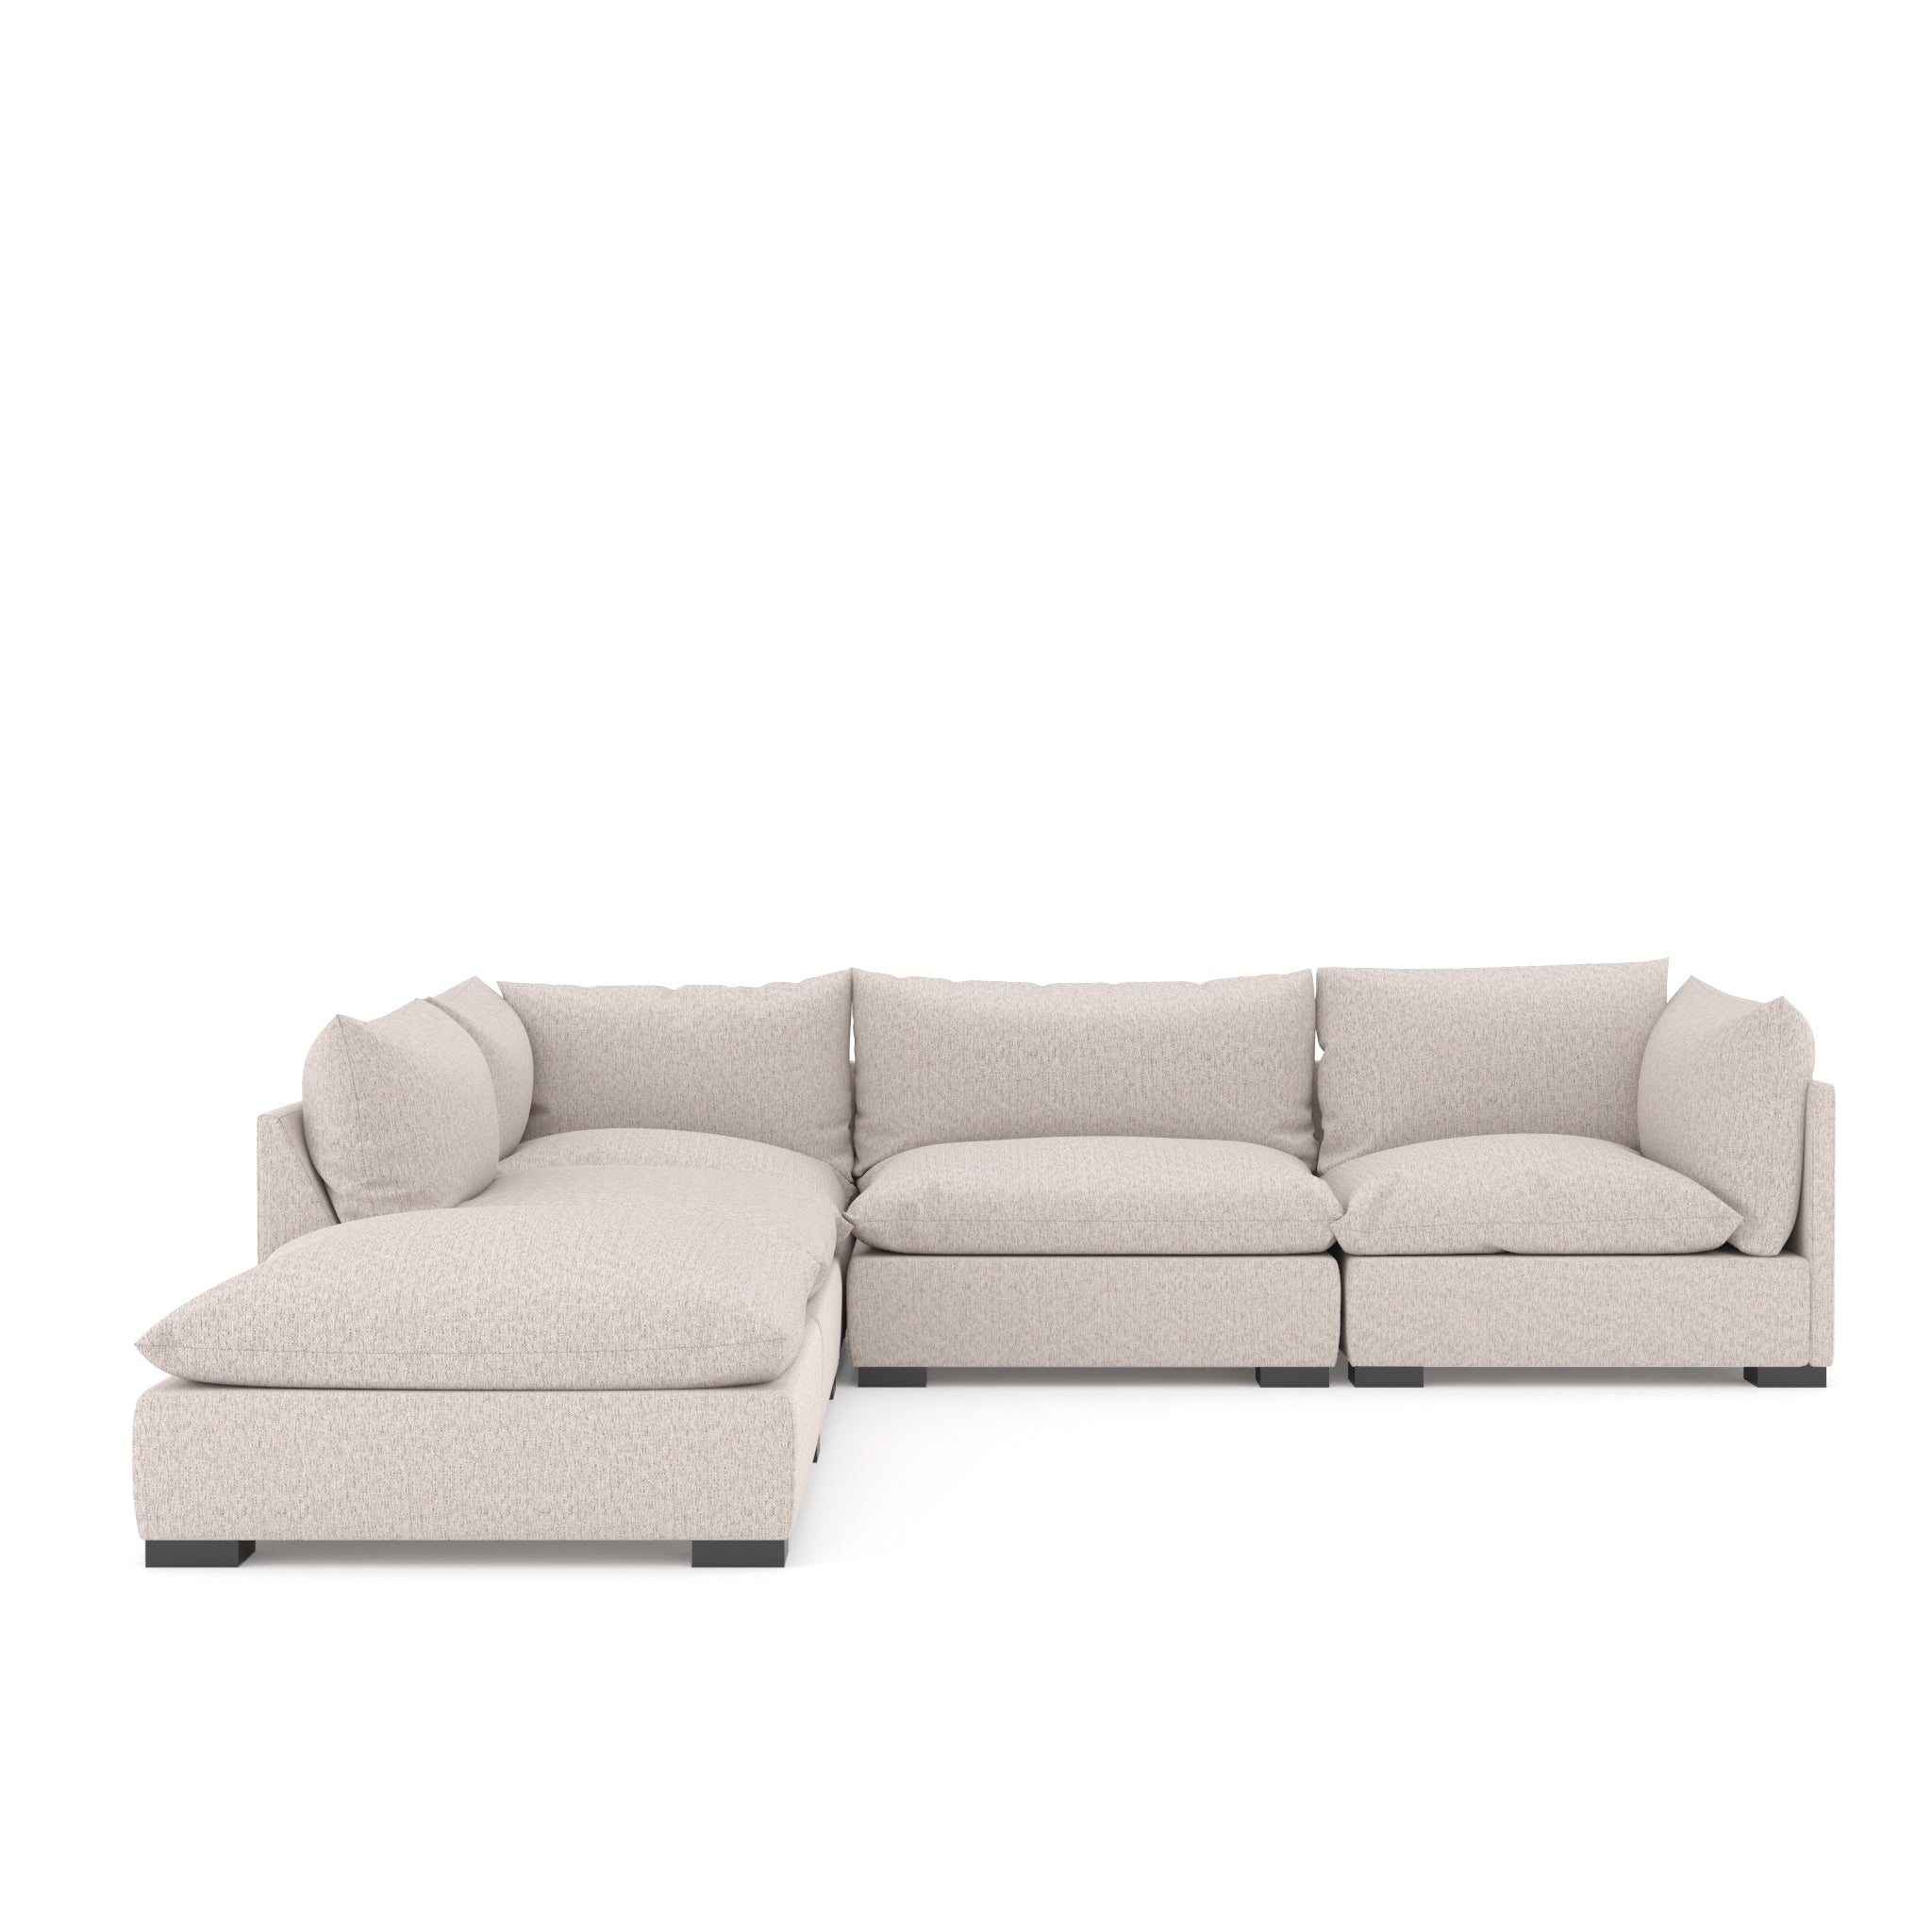 Webster 4-Piece Sectional